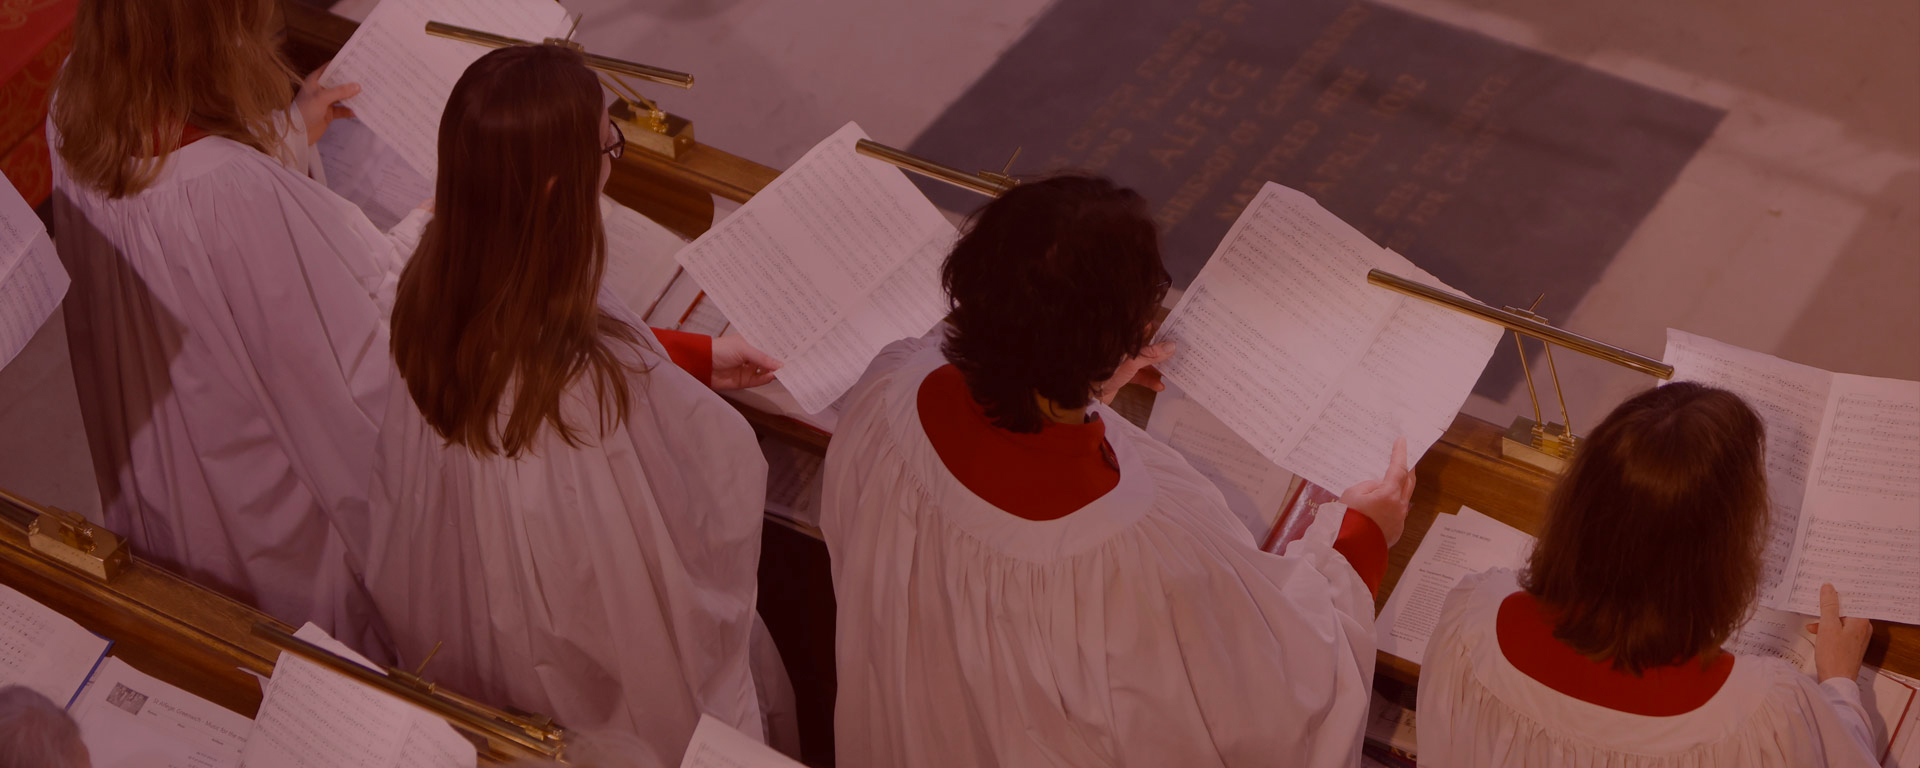 Music*Explore the many musical activities of St Alfege Church*Music at St Alfege